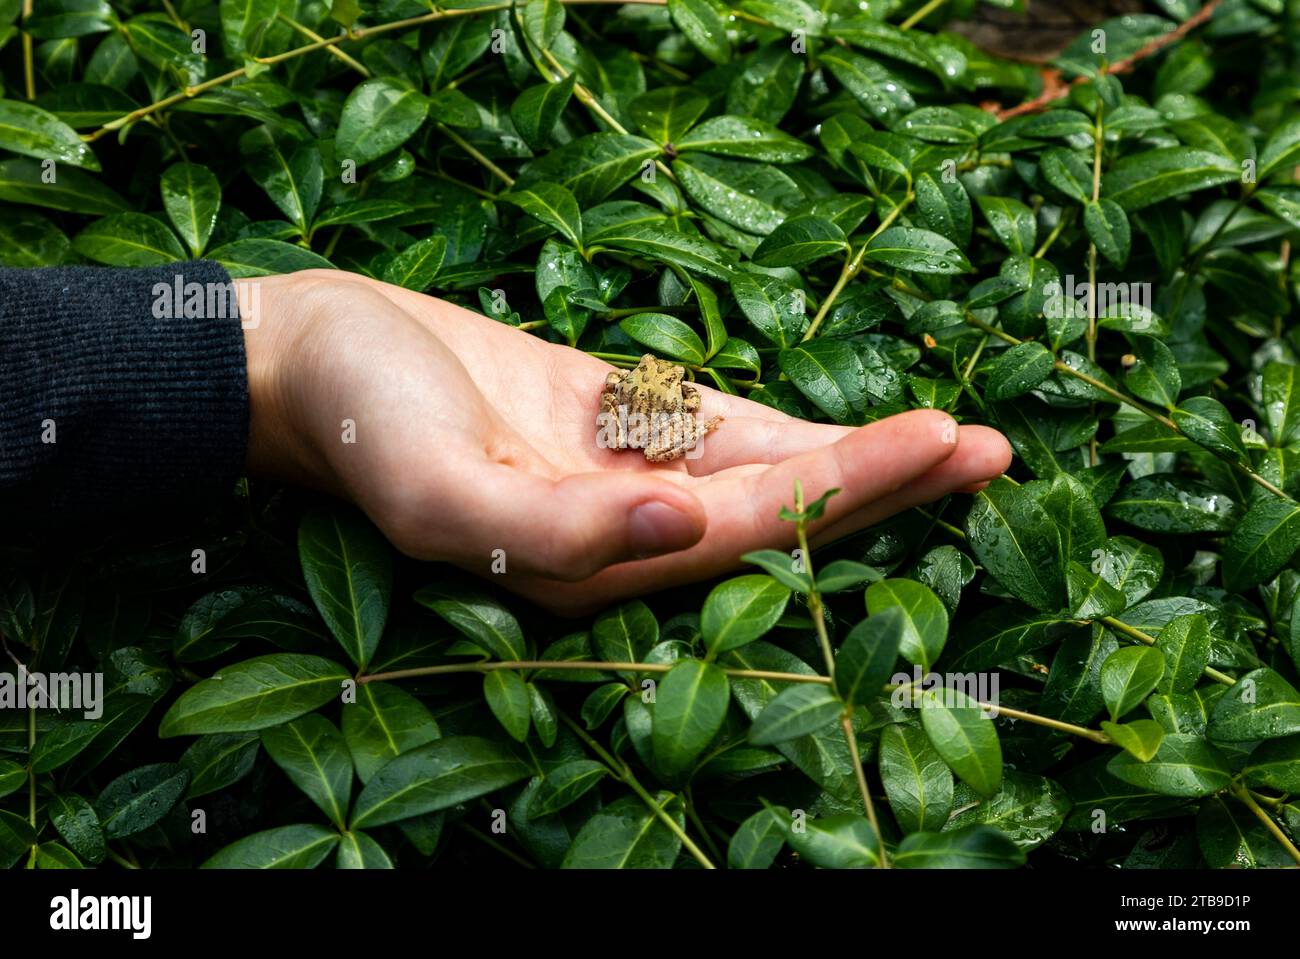 Close-up of the hand of a young boy holding a small frog against green leaves while on vacation; Sicamous, British Columbia, Canada Stock Photo